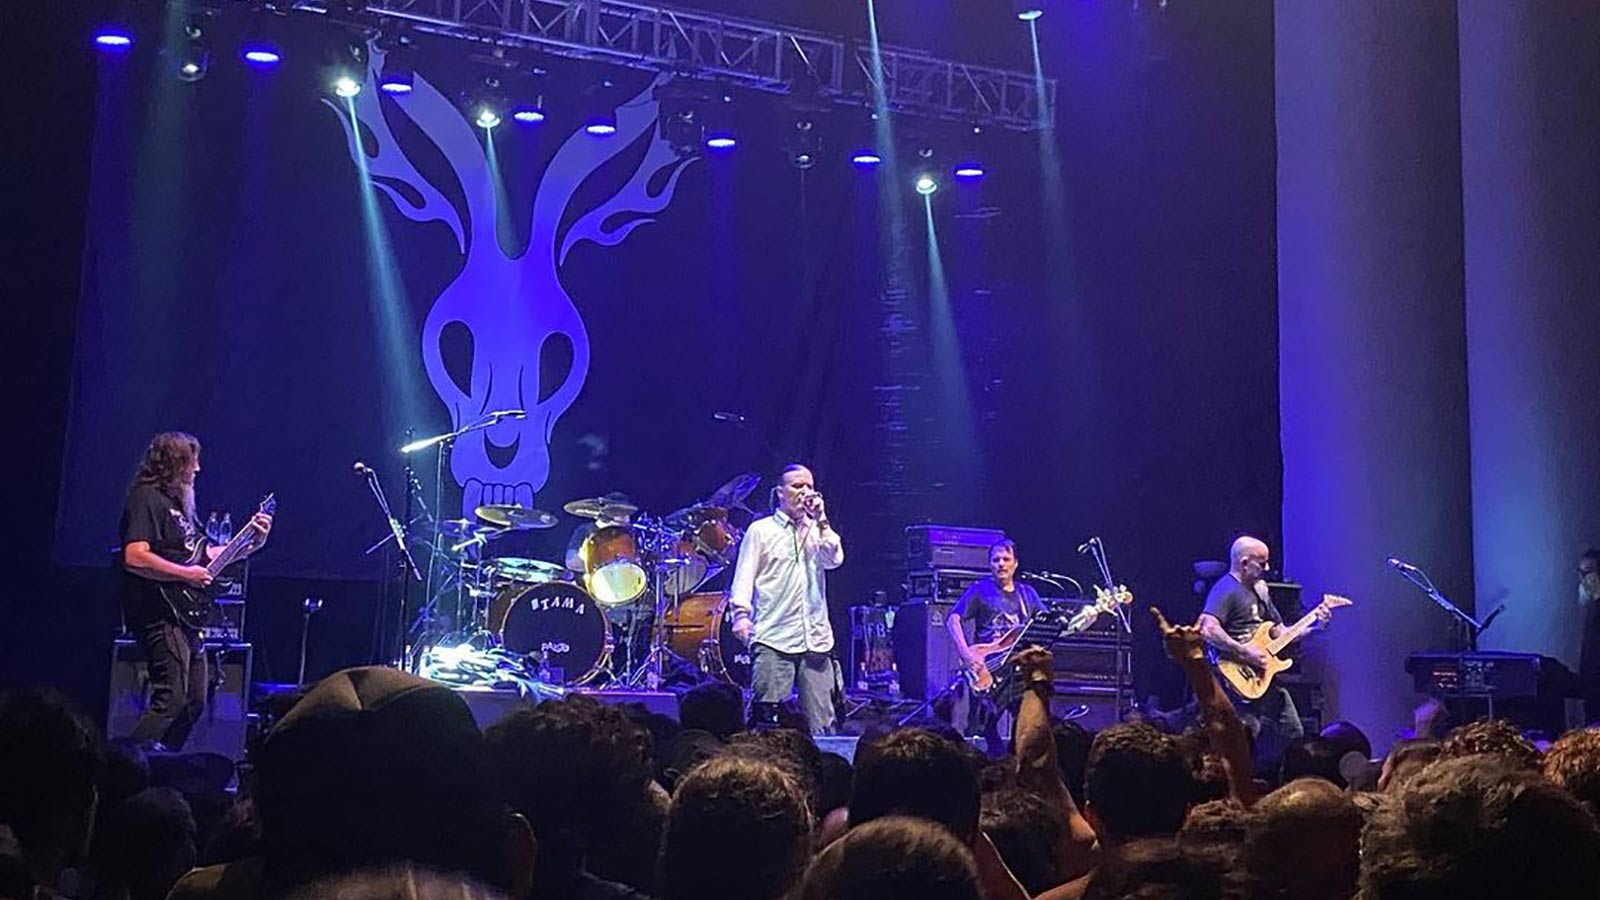 Mike Patton's First Show Since 2020 See Mr. Bungle Video and Setlist